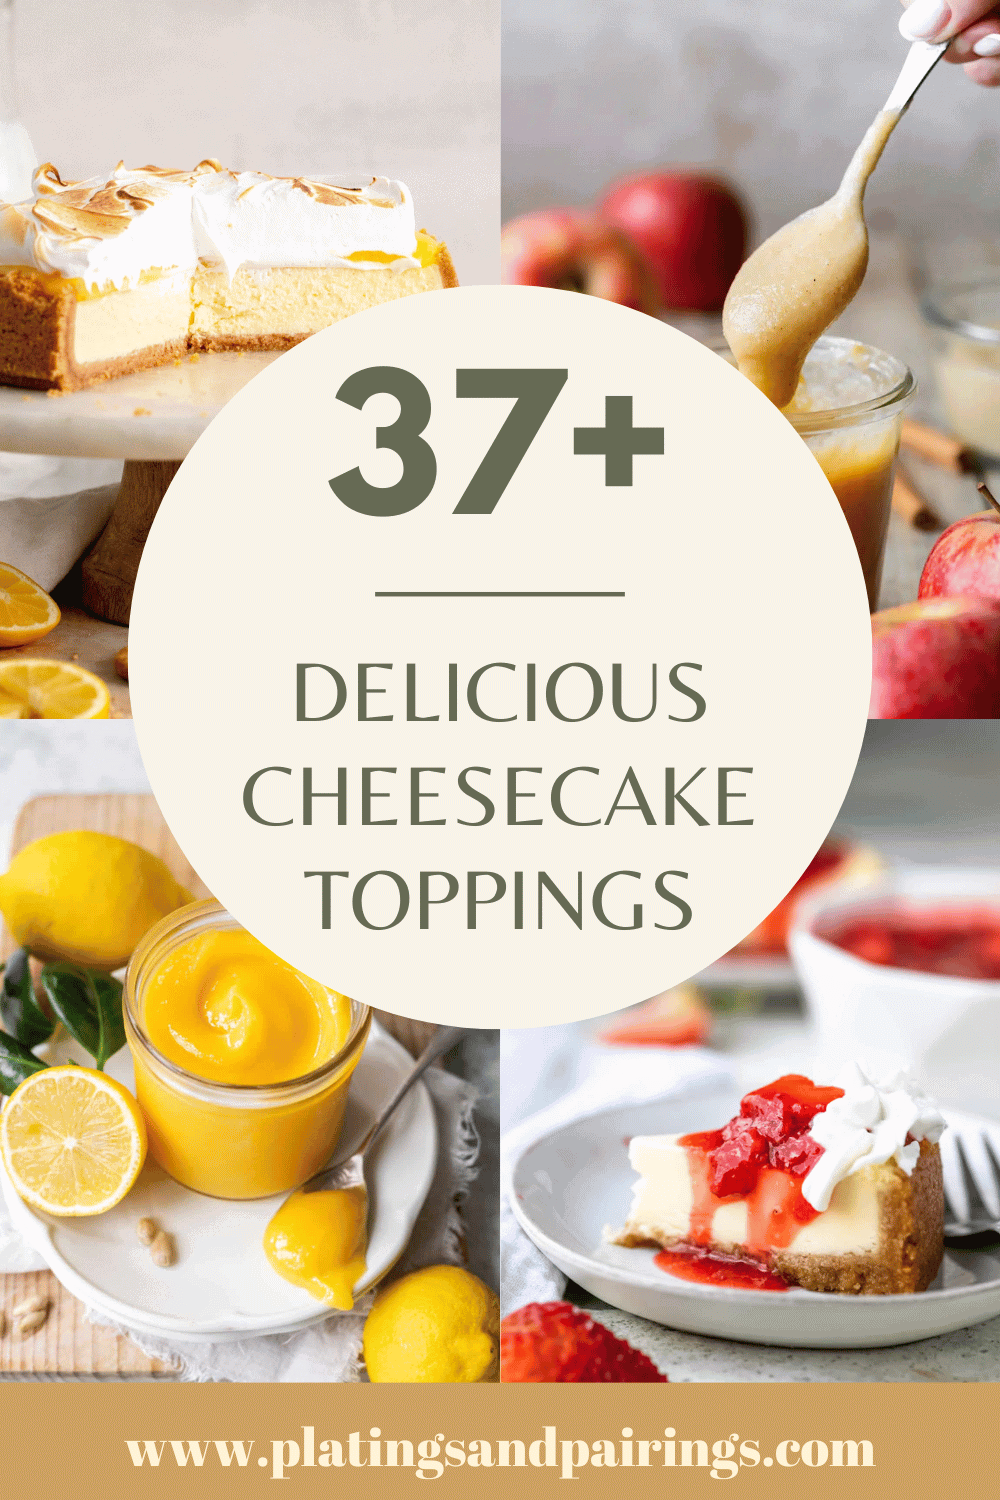 Collage of cheesecake toppings with text overlay.